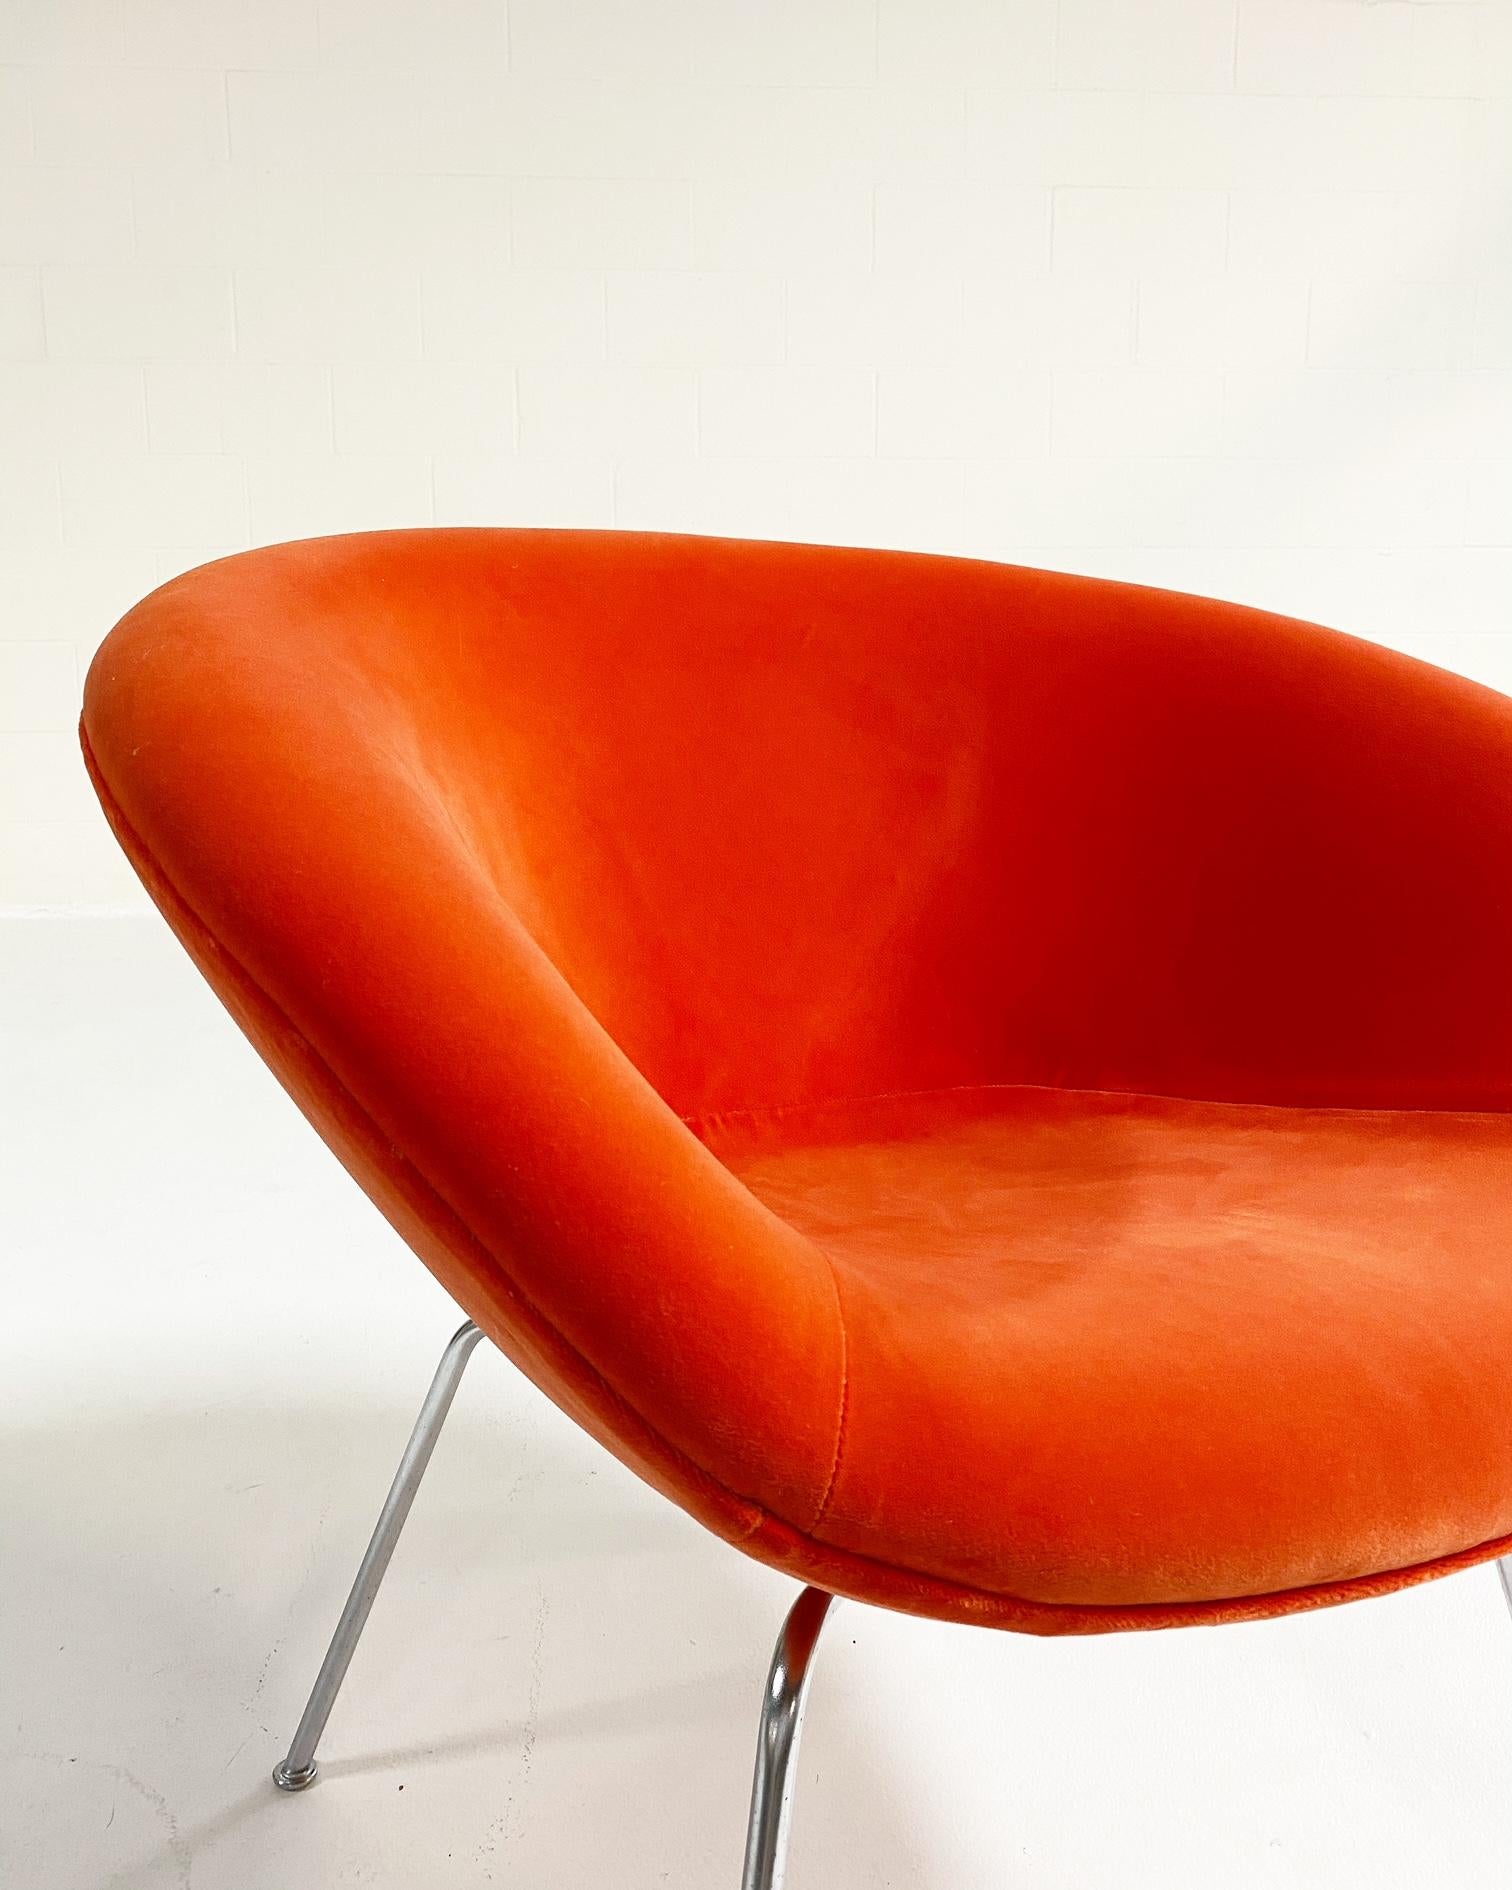 Arne Jacobsen was a true visionary as an architect and designer, and his Pot chair is a little gem of mid-century designs. Restored in a playful pop orange velvet by Loro Piana, this chair is perfect for a fun burst of color in any room.